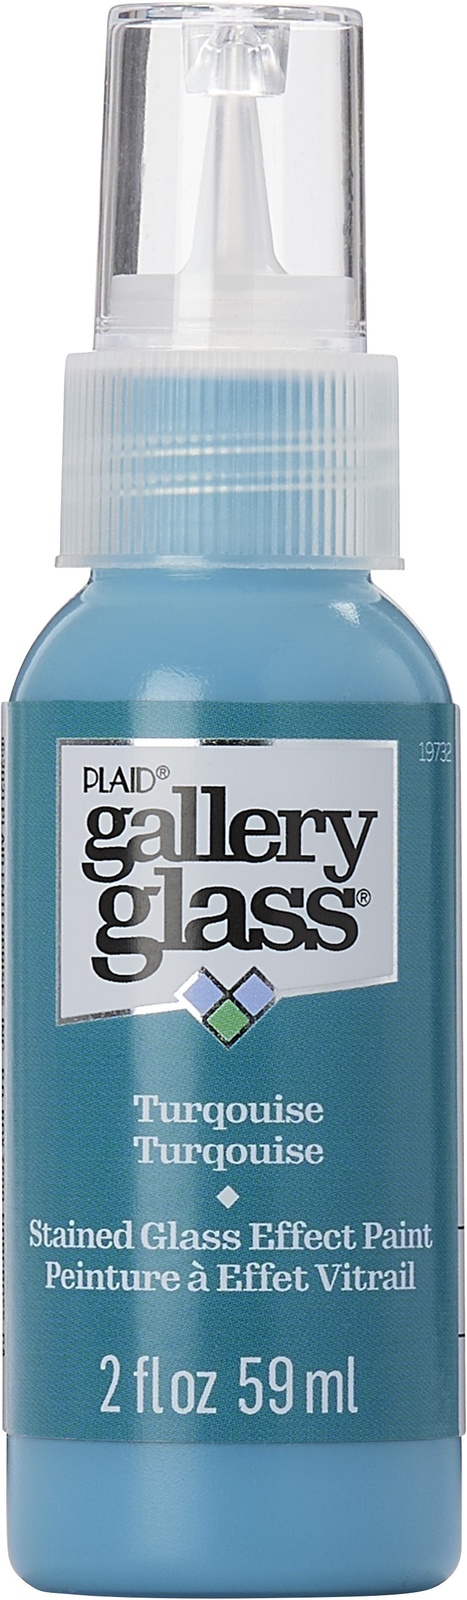 FolkArt Gallery Glass Paint 2oz Turquoise - $13.96